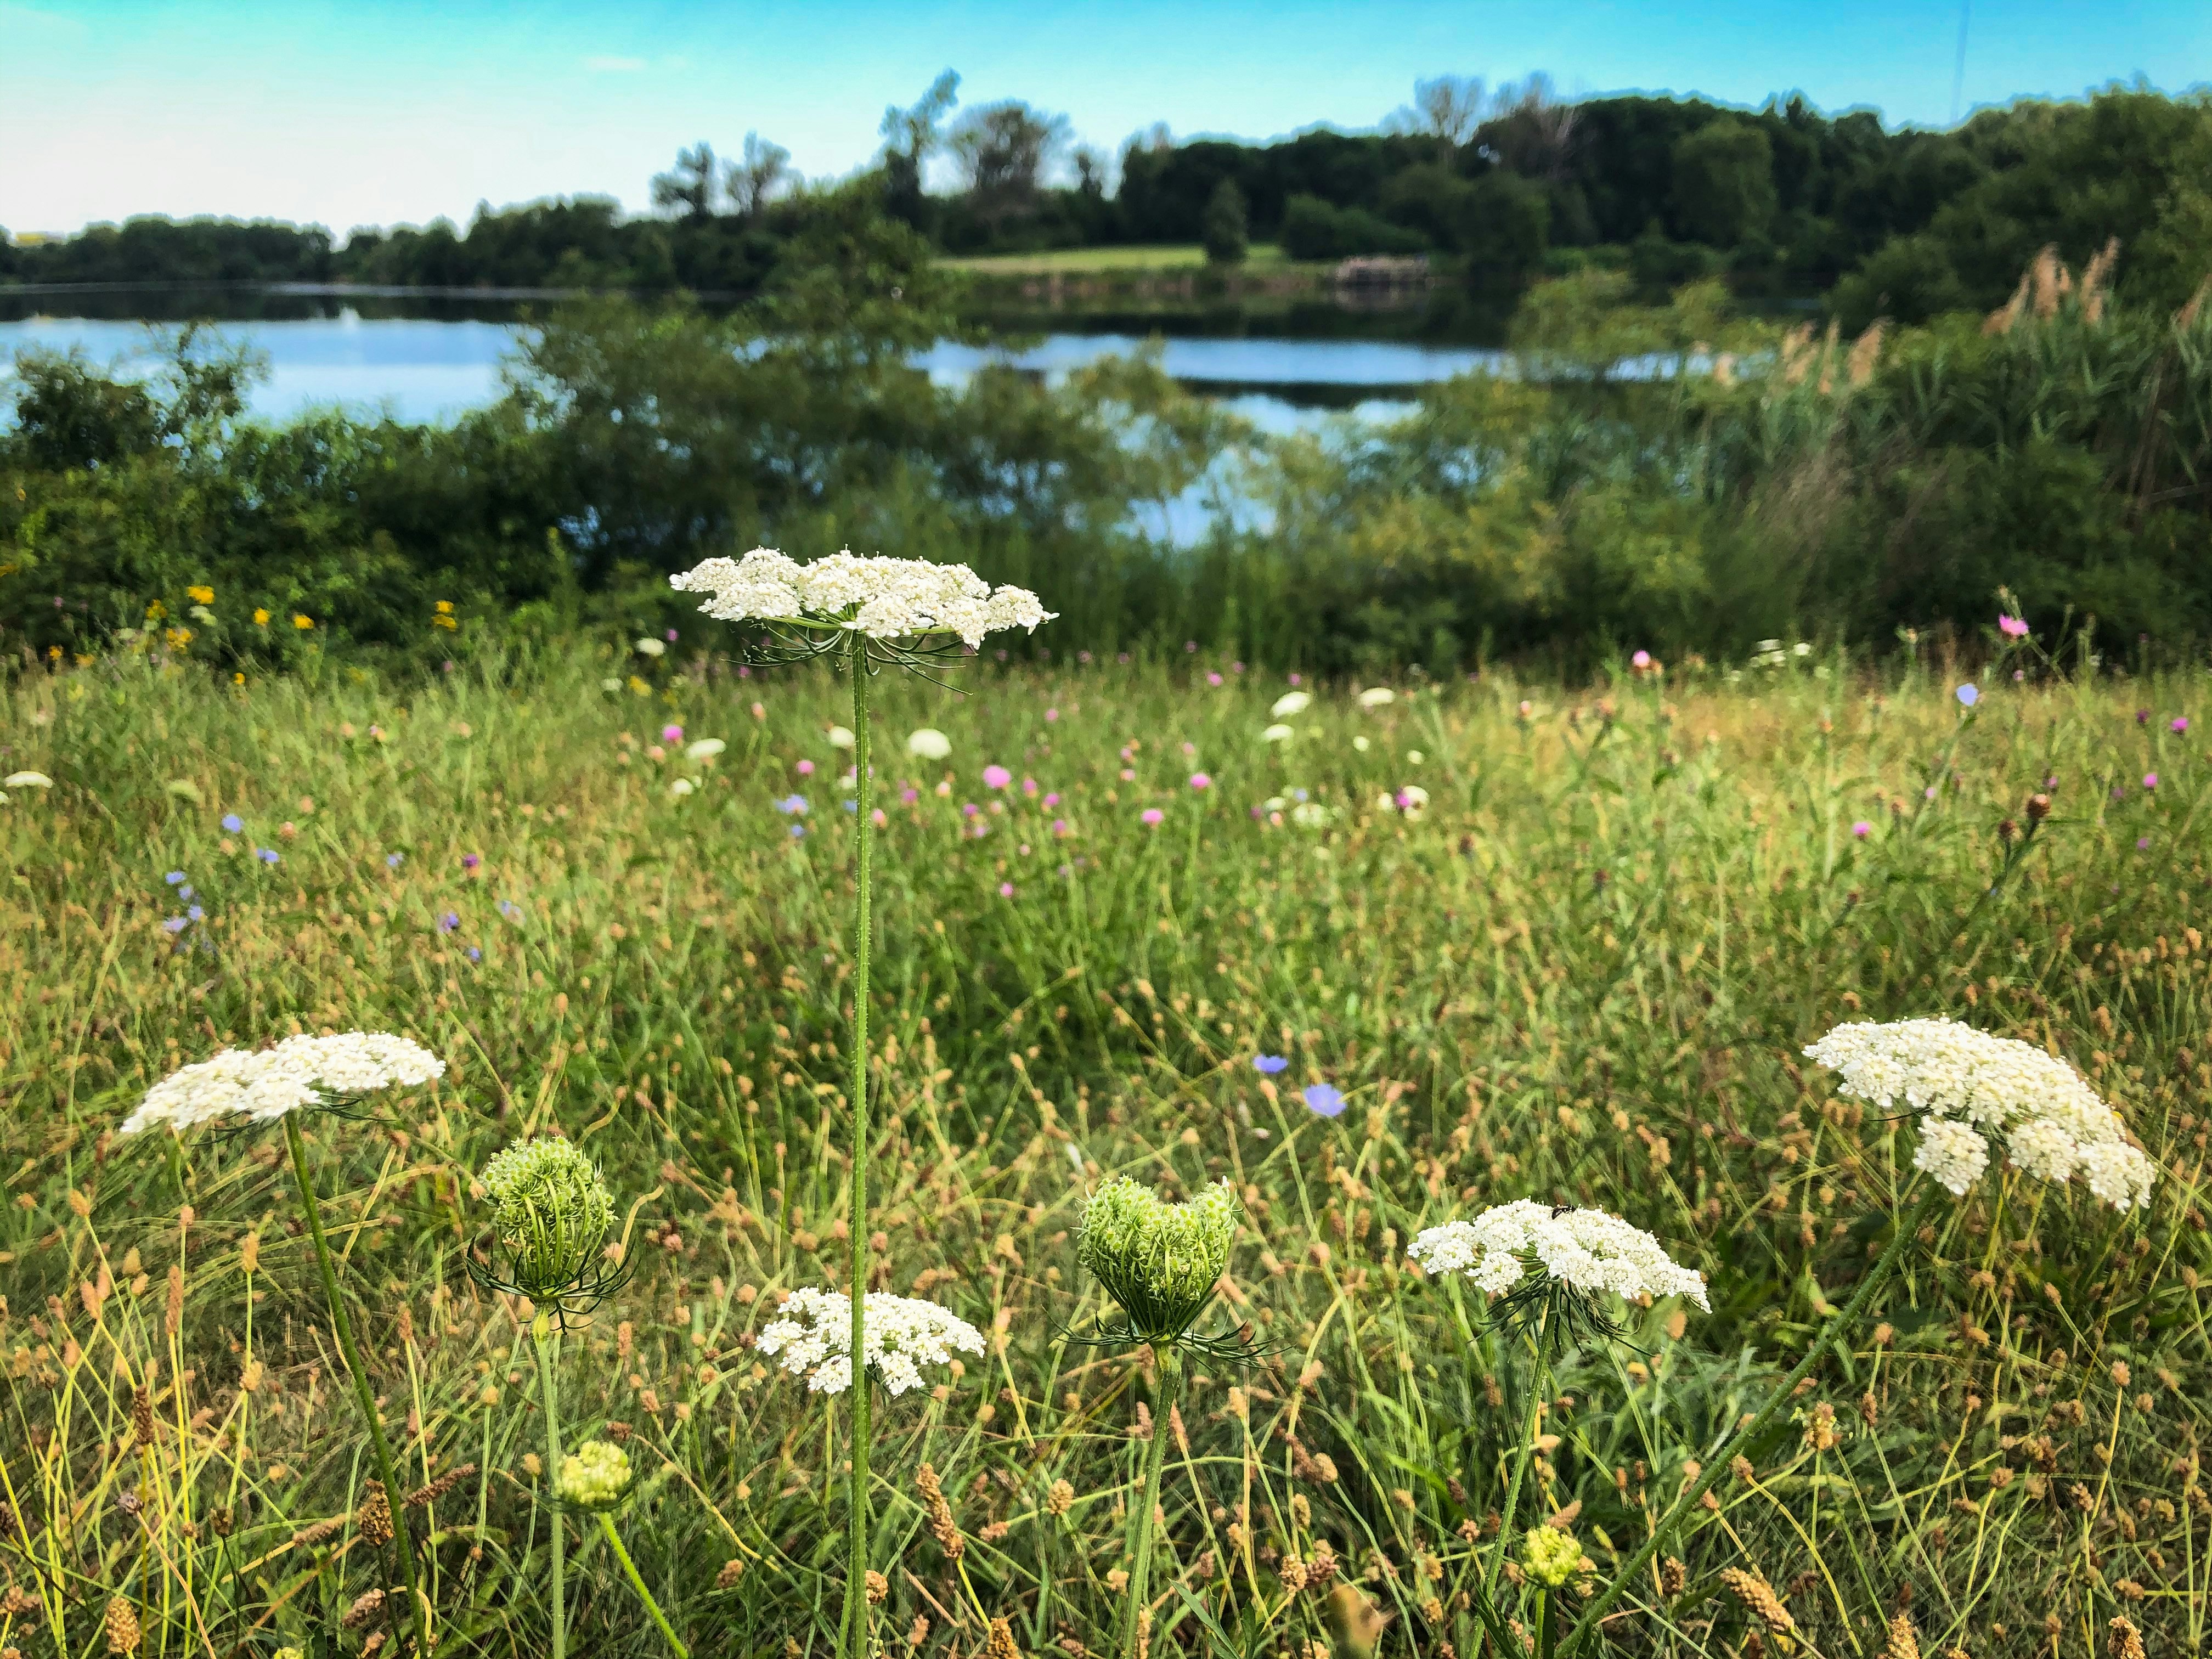 white flowers on green grass field near body of water during daytime